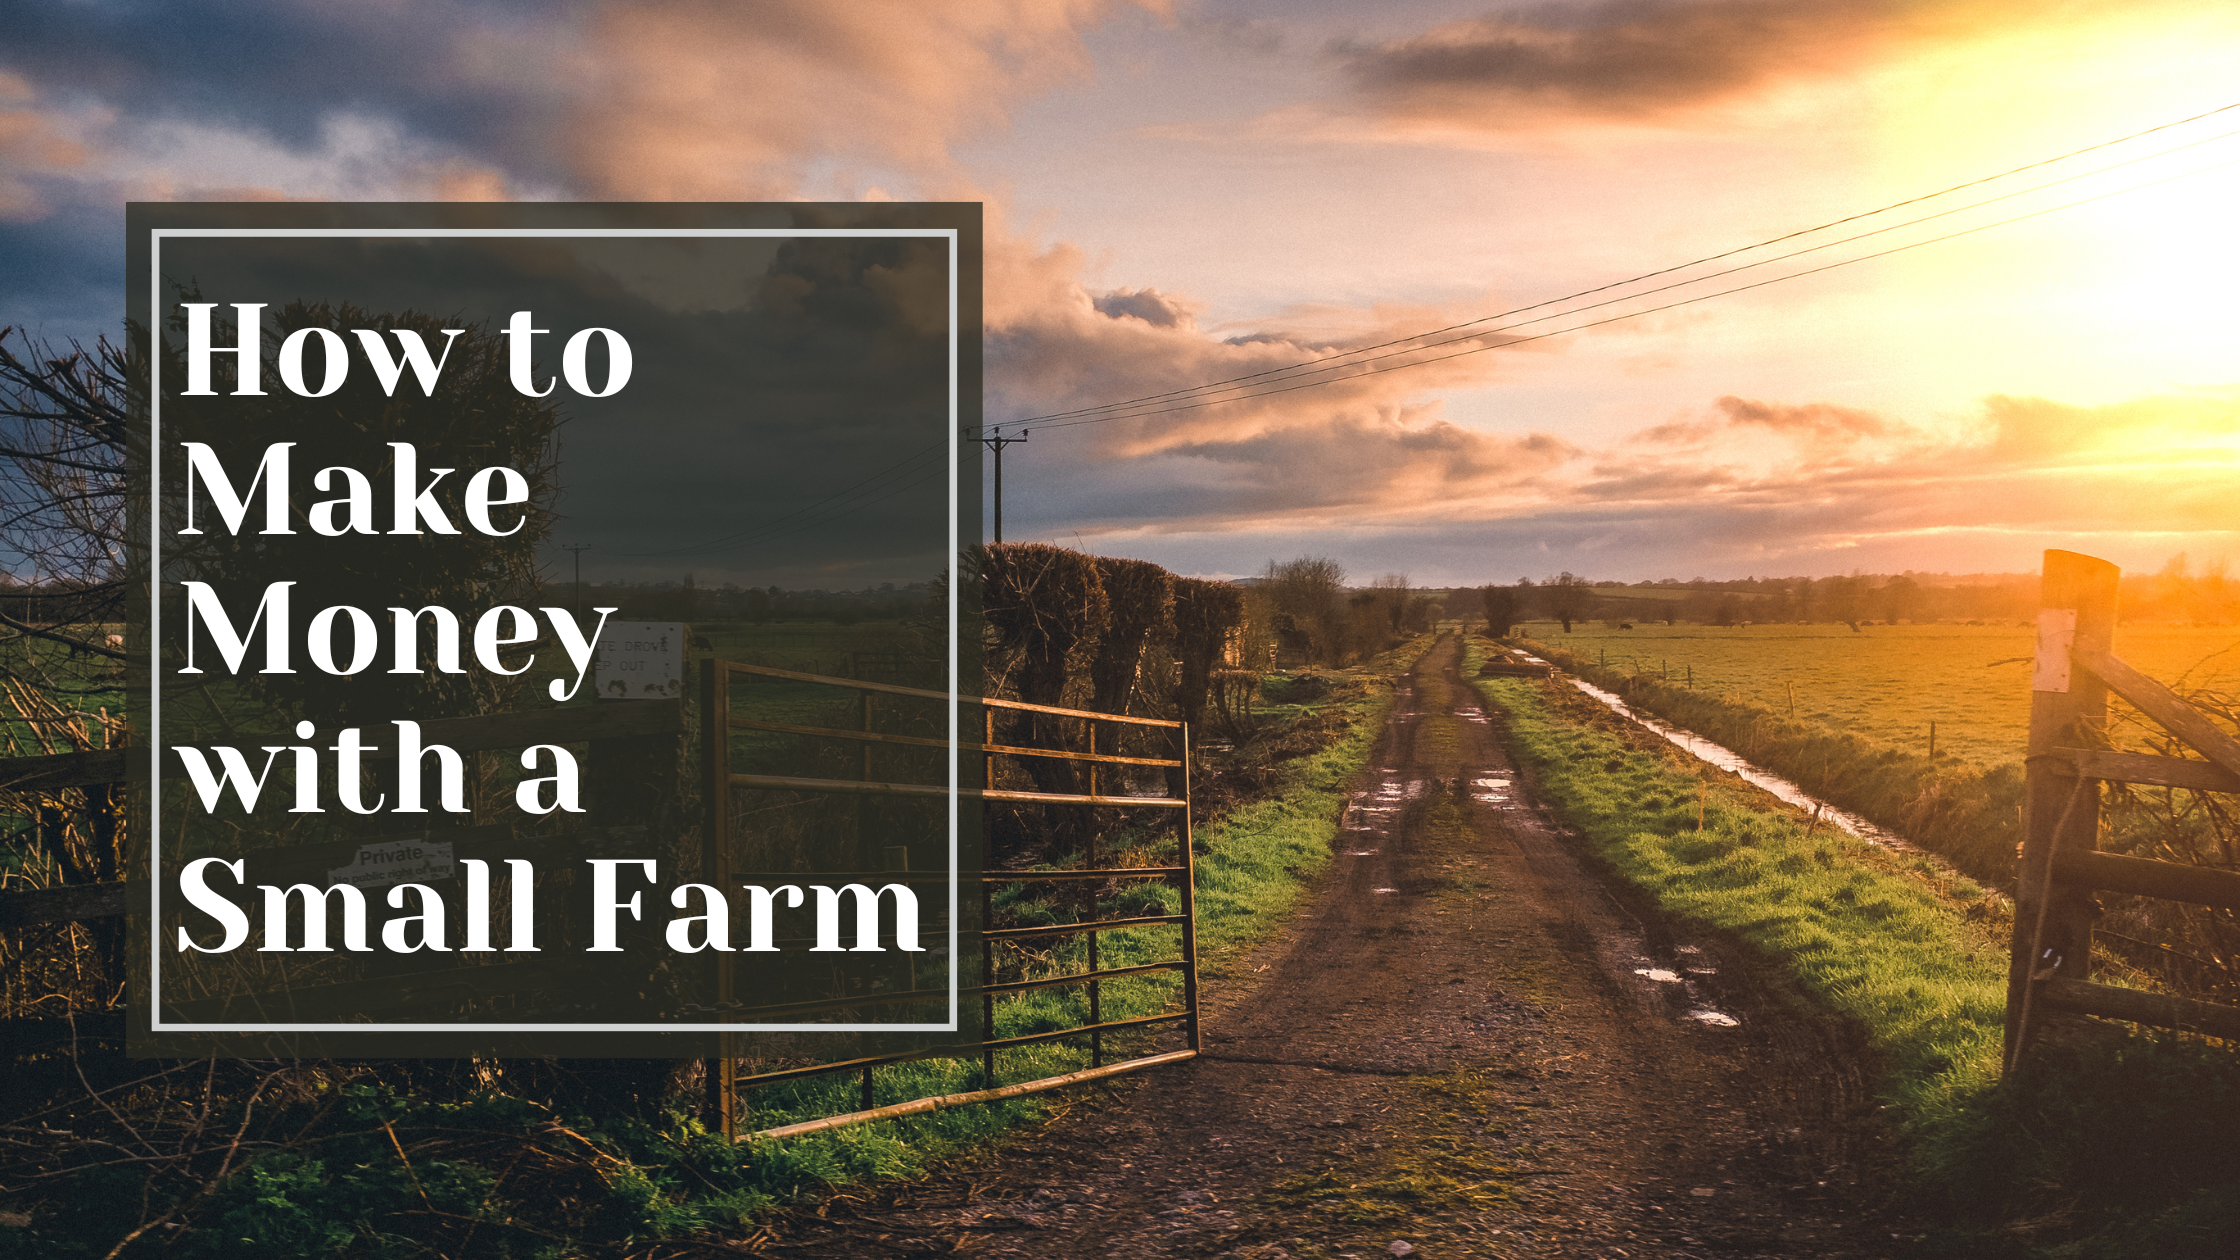 How to Make Money with a Small Farm